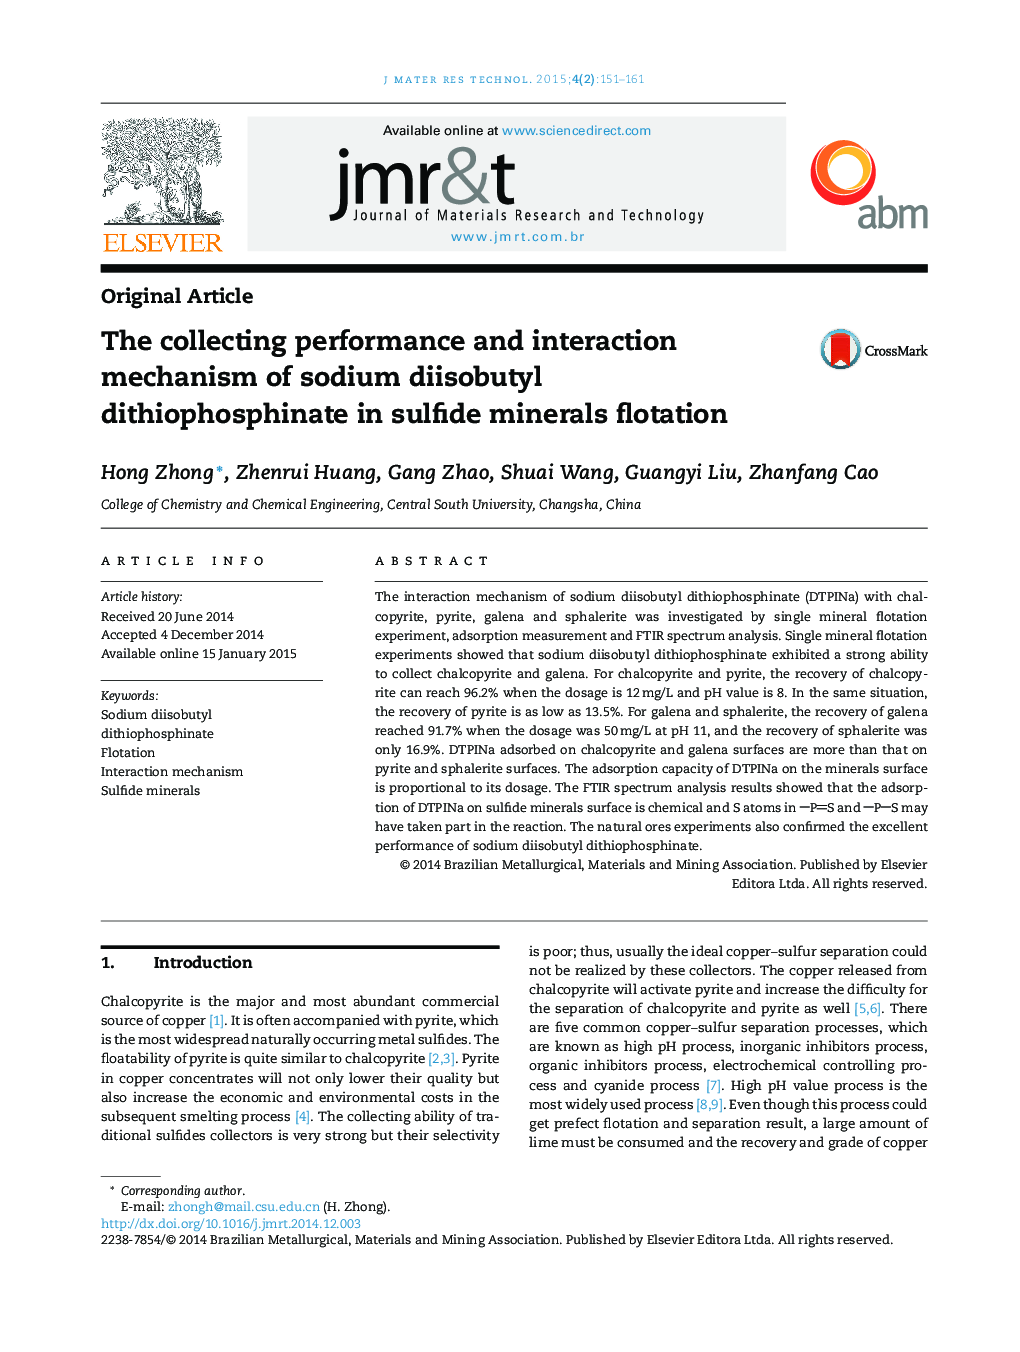 The collecting performance and interaction mechanism of sodium diisobutyl dithiophosphinate in sulfide minerals flotation